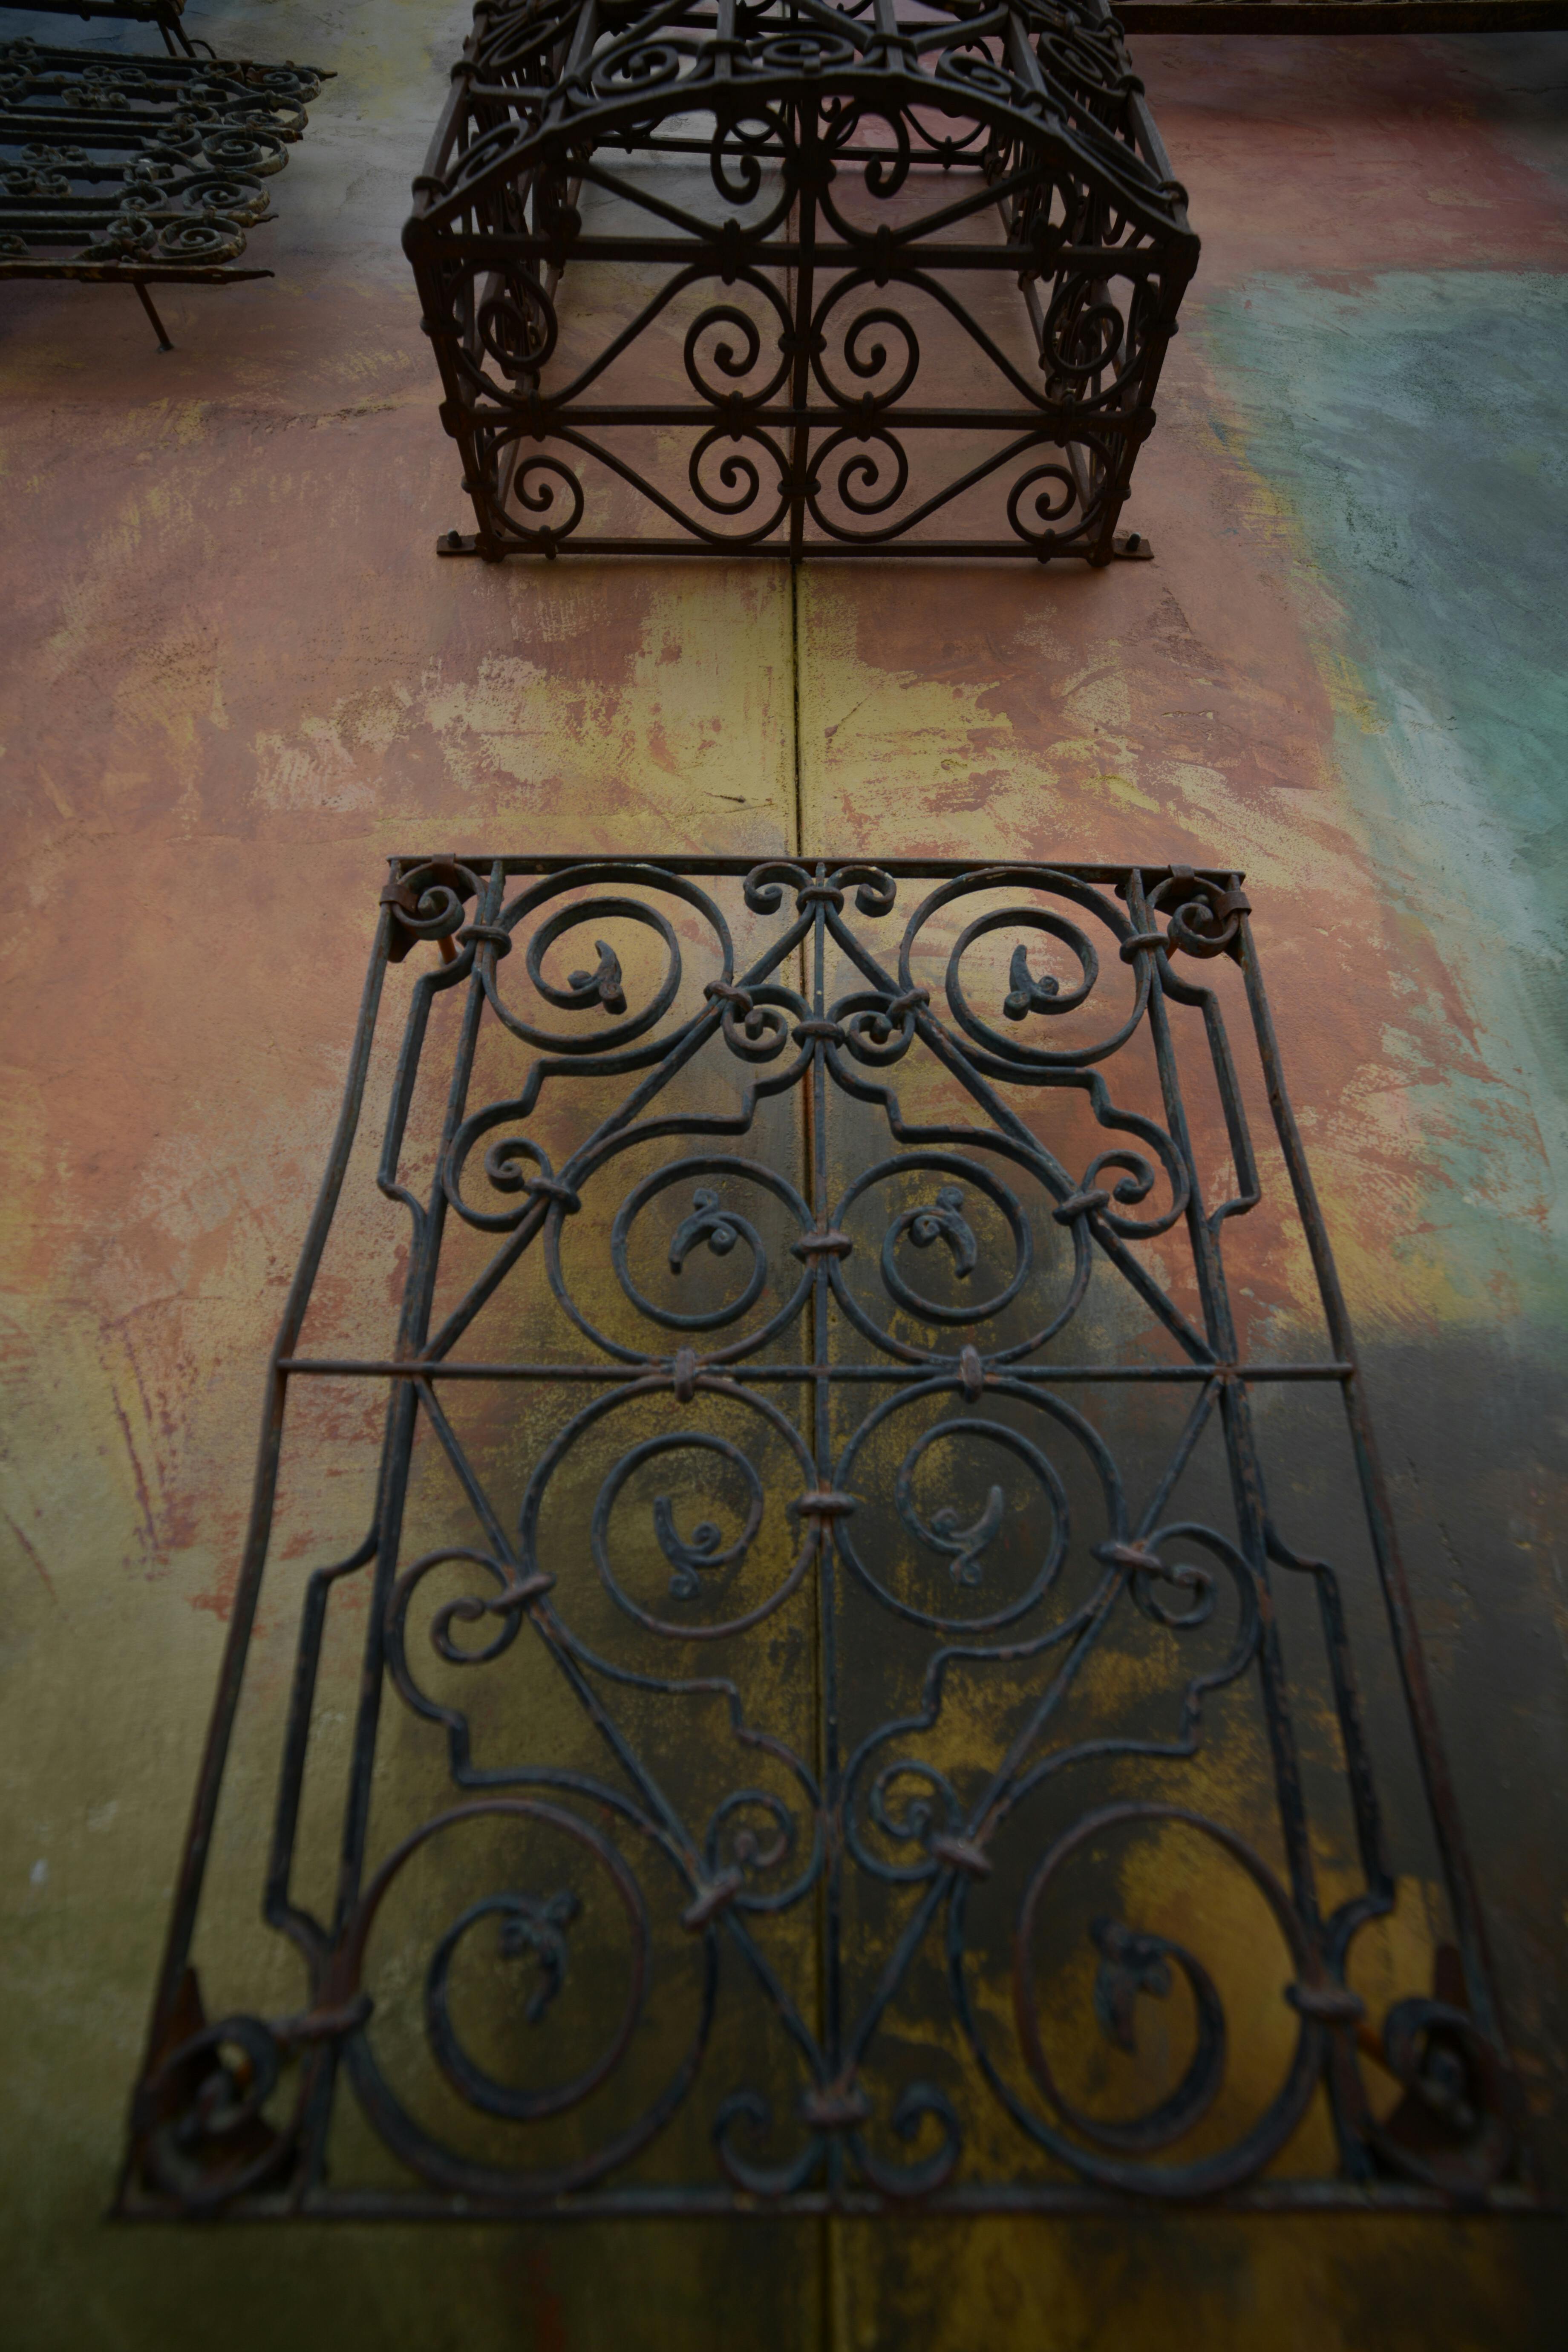 Free stock photo of #murial, wall art, wrought iron